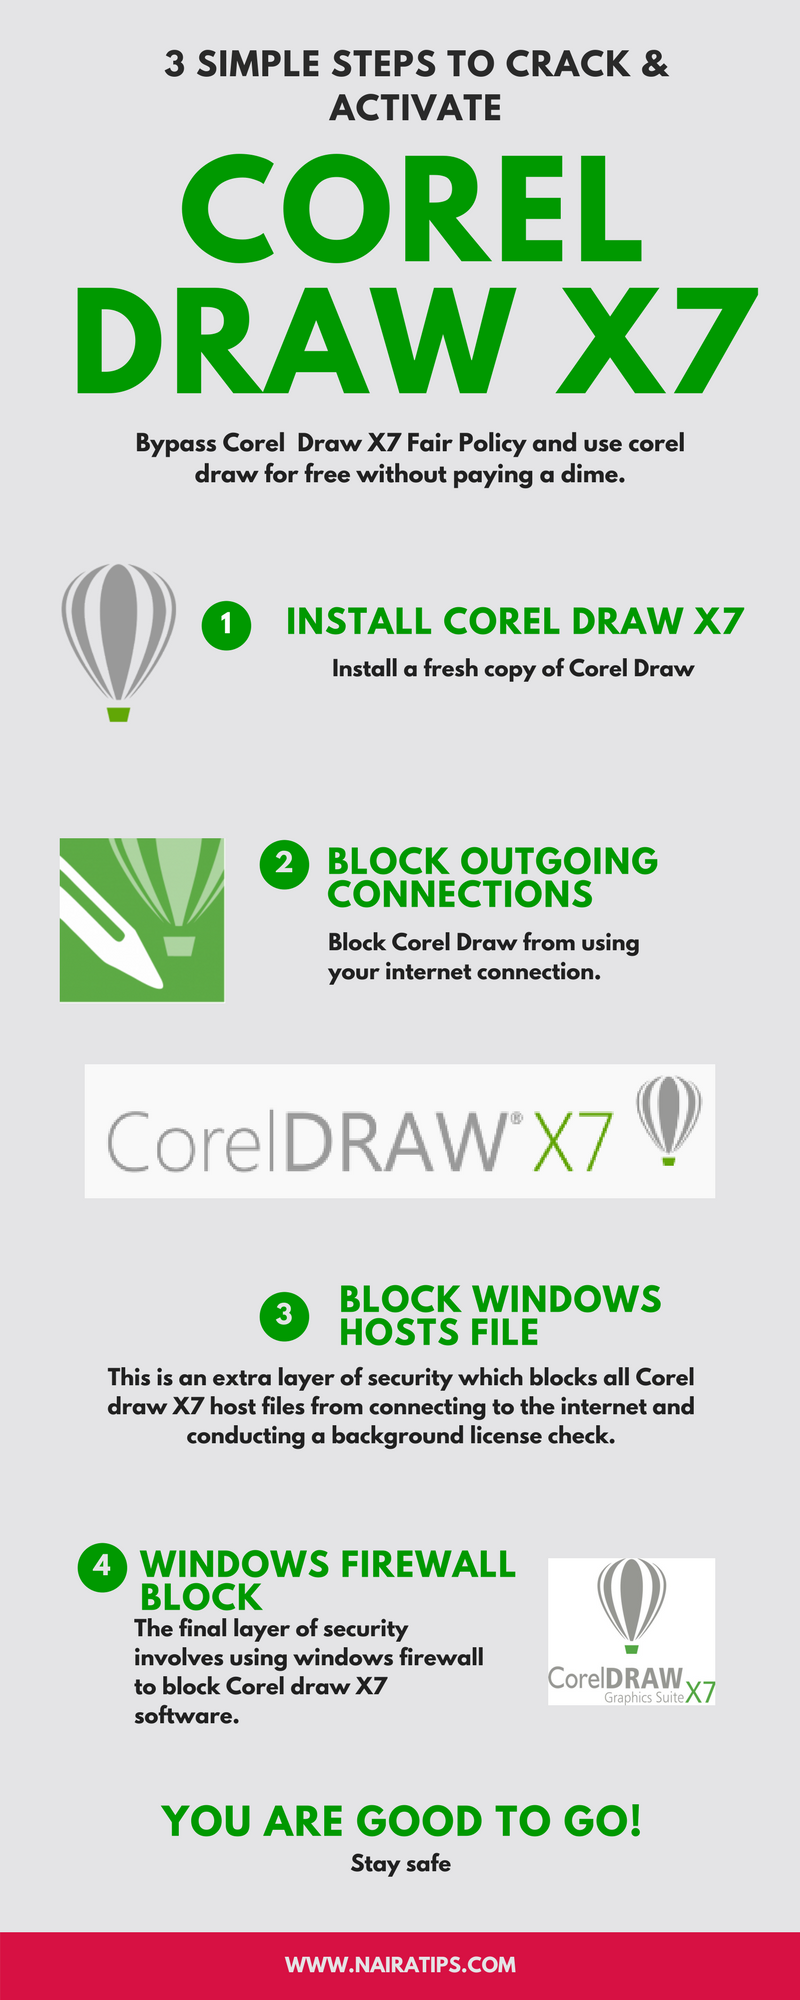 How to crack corel draw x7